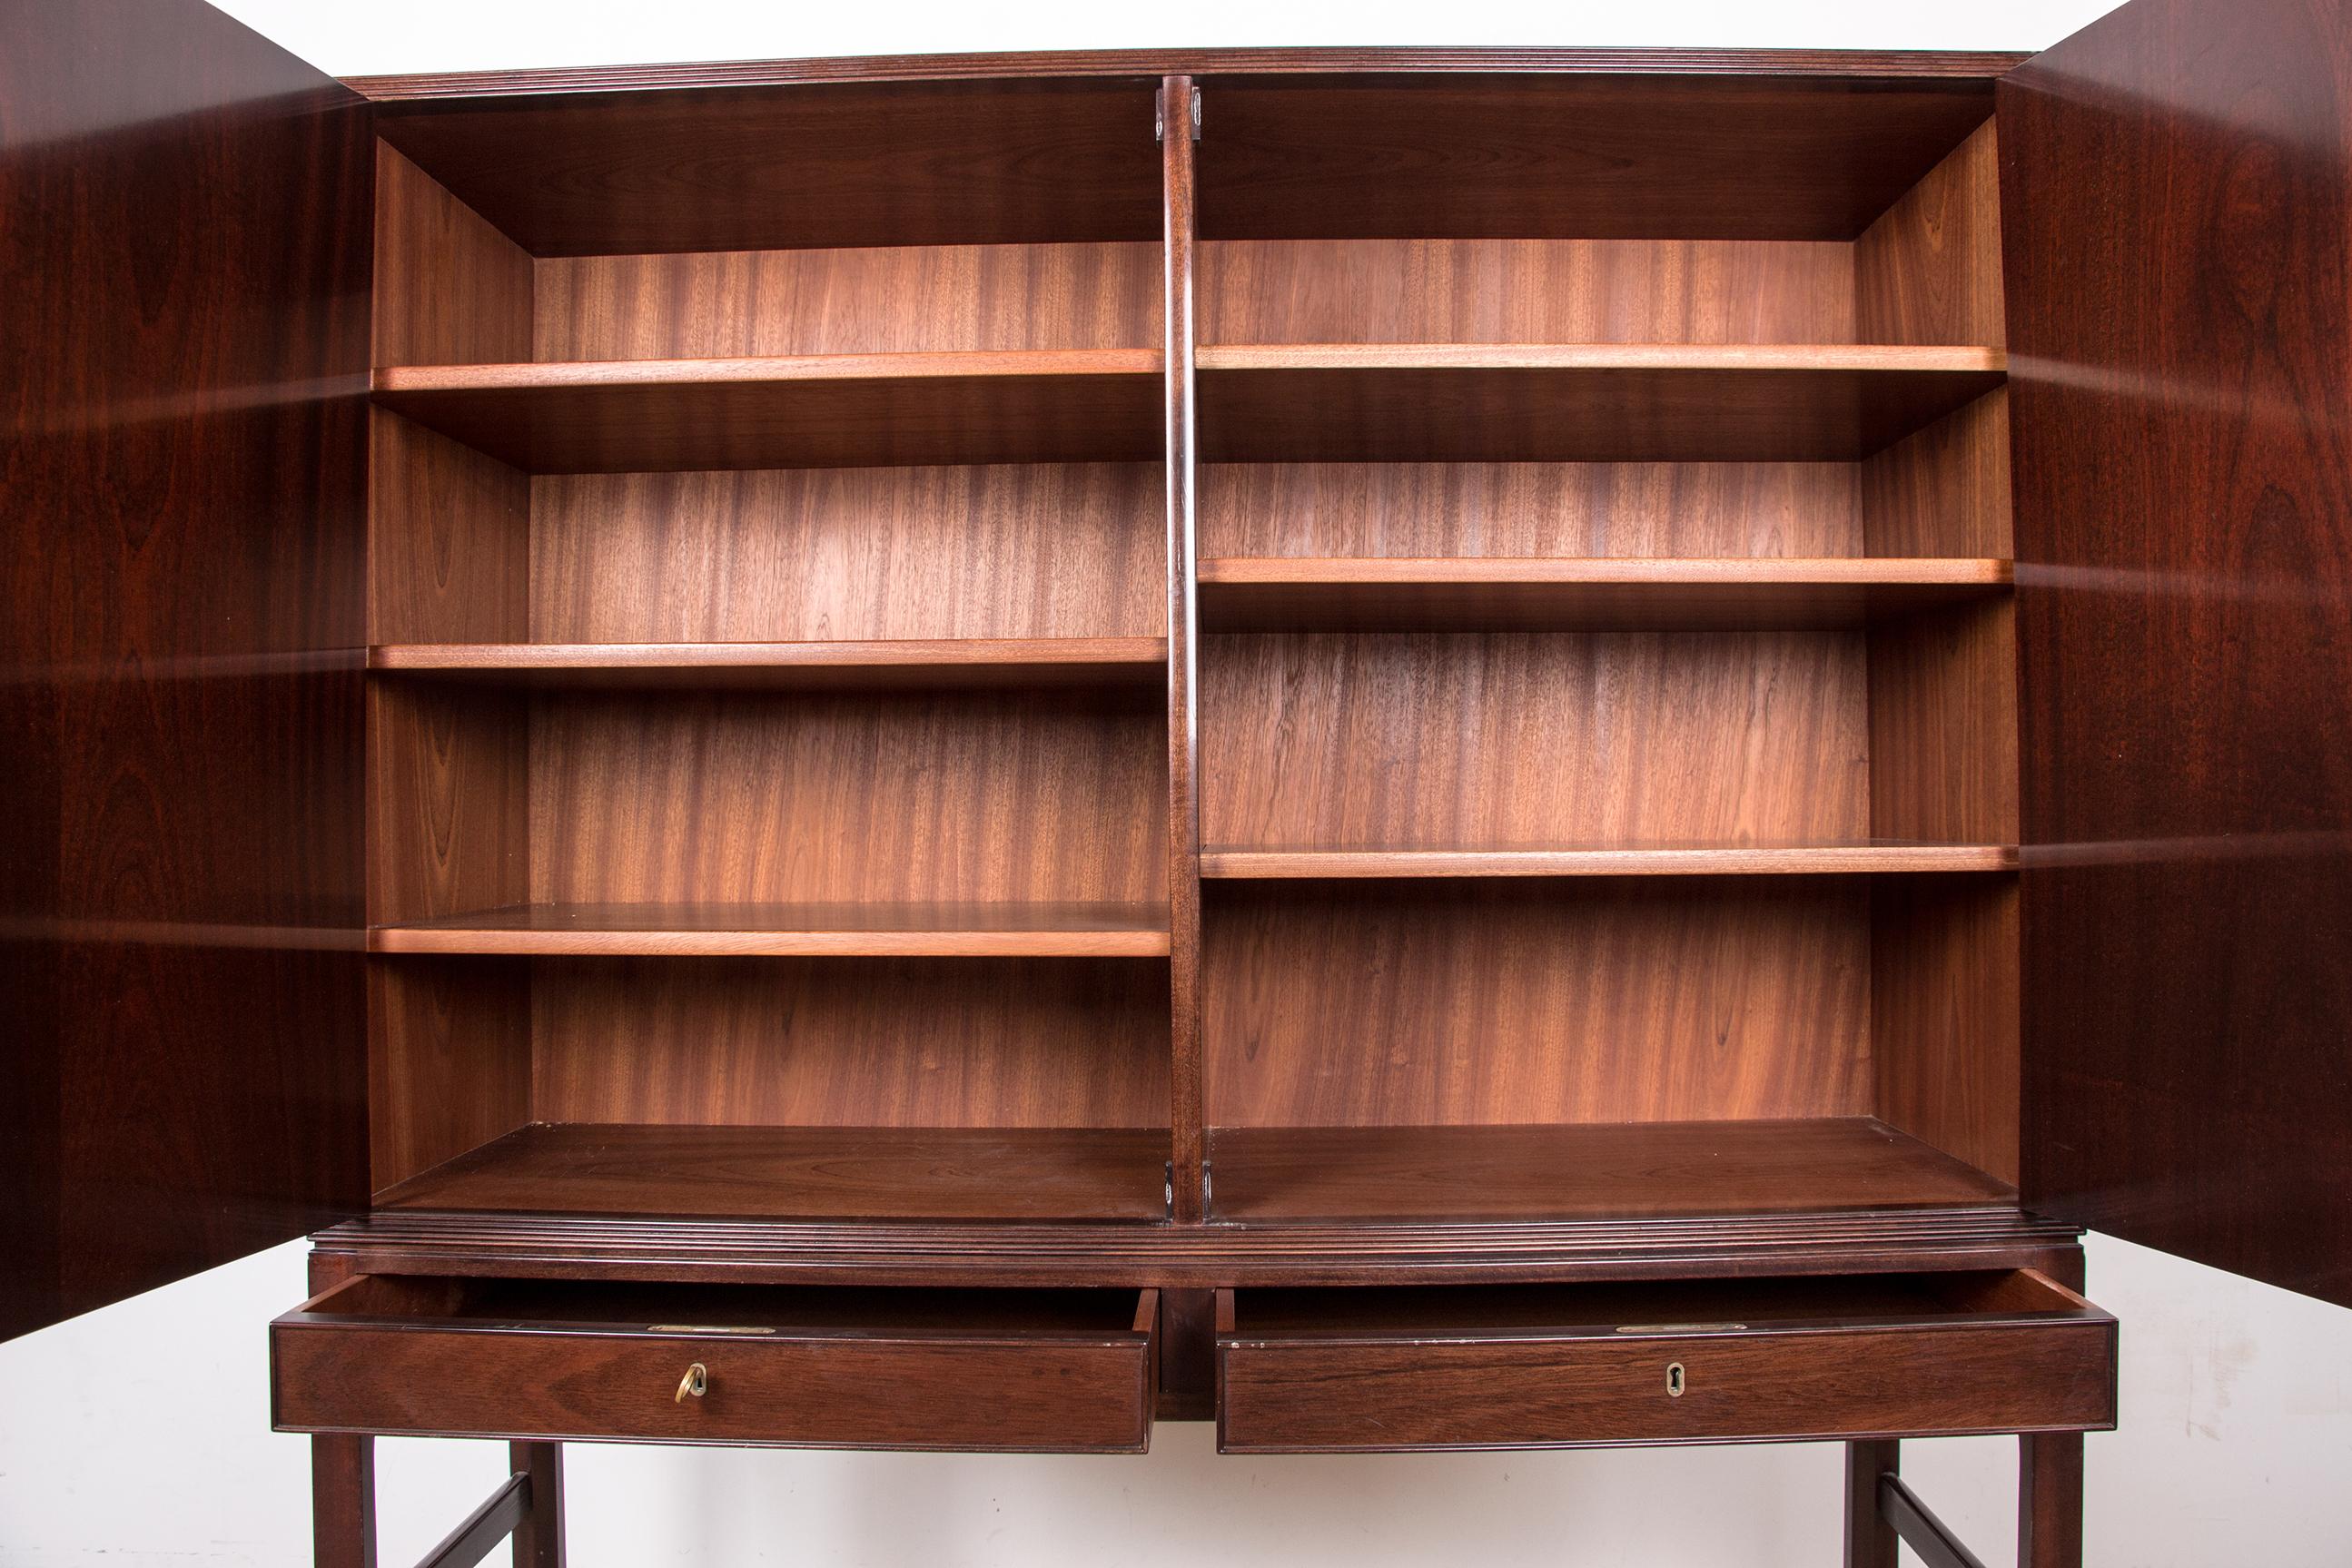 High Danish Cabinet in Mahogany and Brass by Ole Wanscher for Poul Jeppesen 1960 For Sale 6